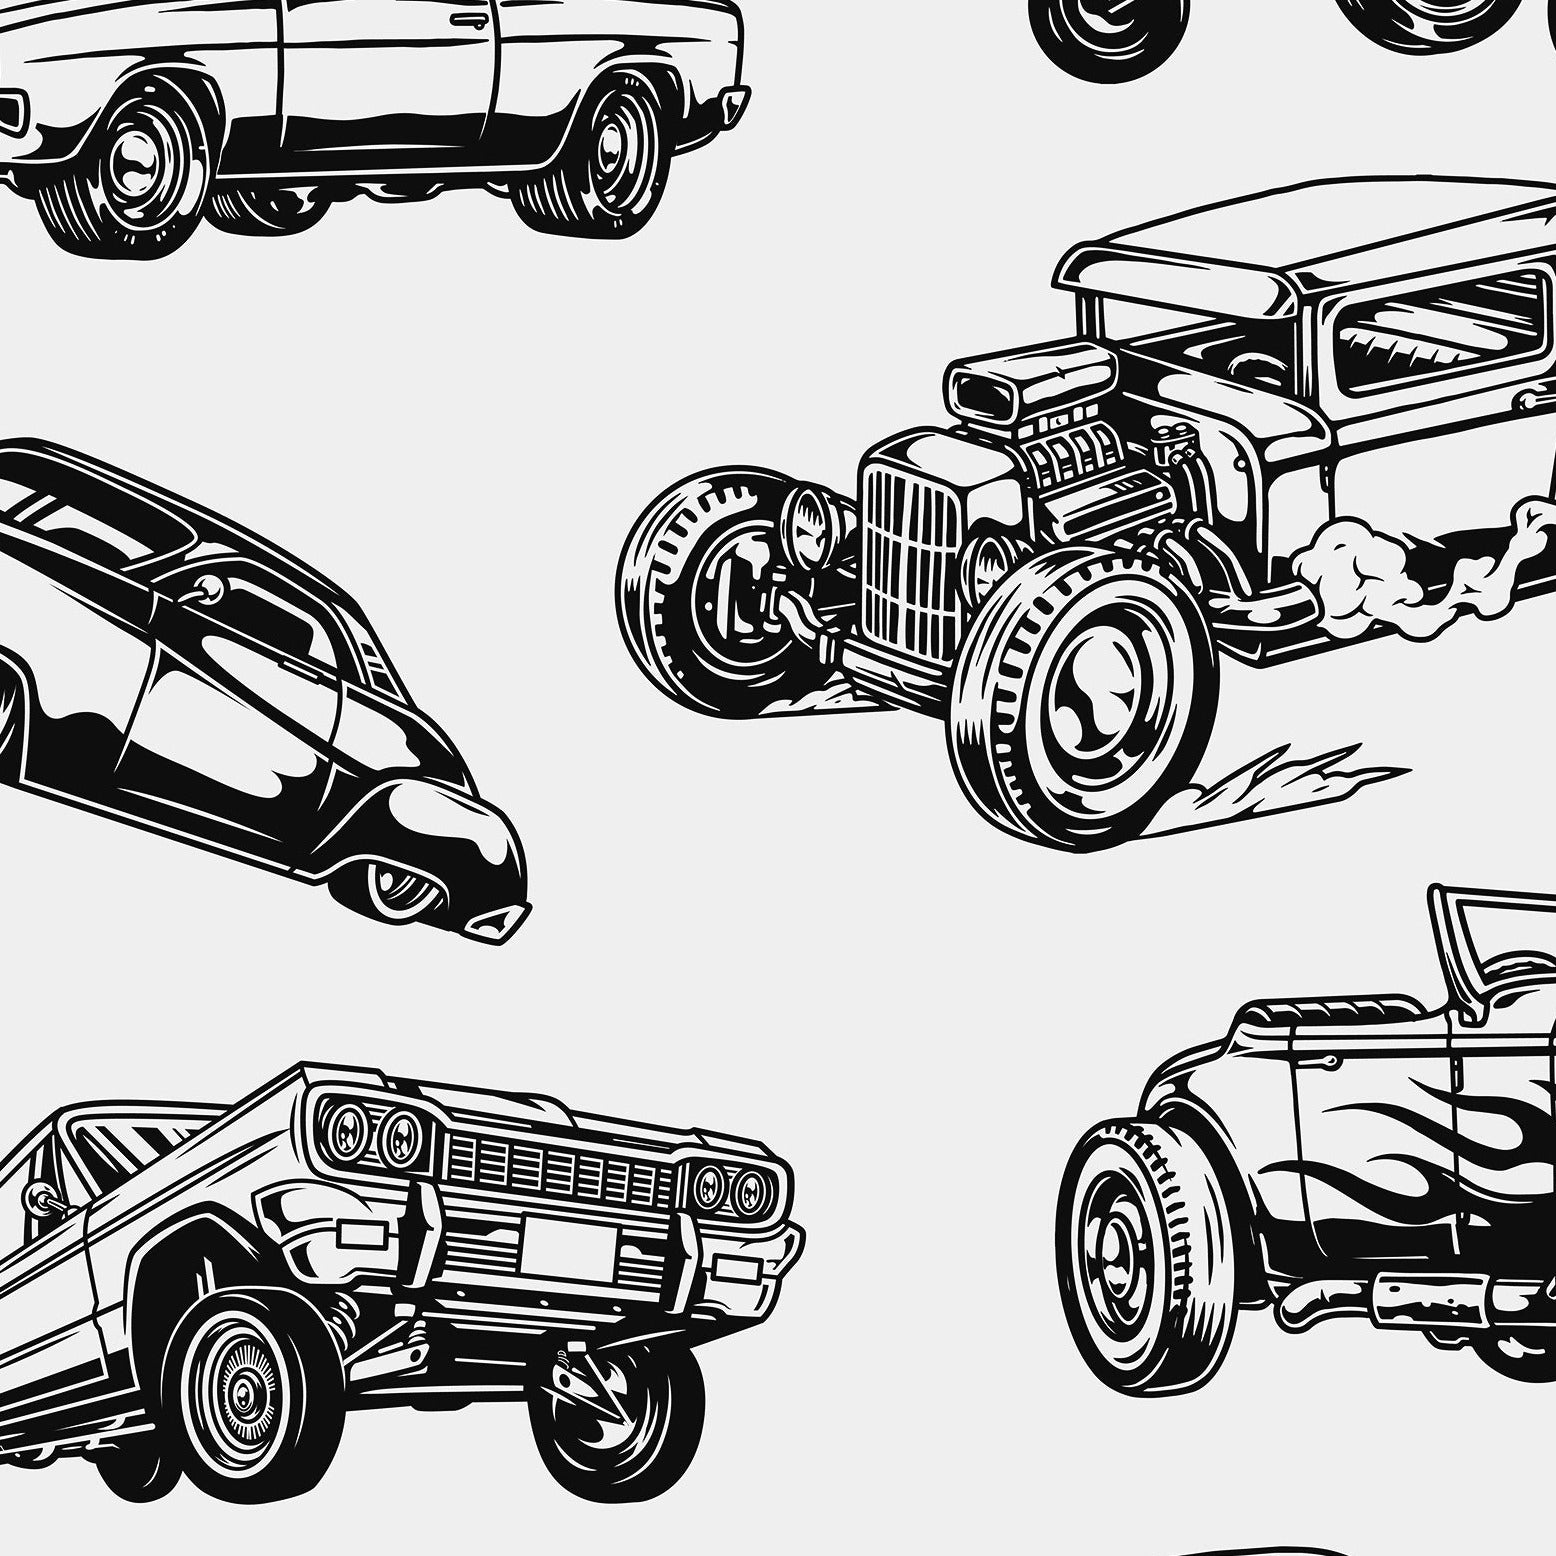 Detailed close-up of the Vintage Cars Wallpaper showing a range of classic cars illustrated in a dynamic and detailed style. Each car is meticulously drawn, capturing the essence of vintage automobile design, ideal for any car enthusiast's space.